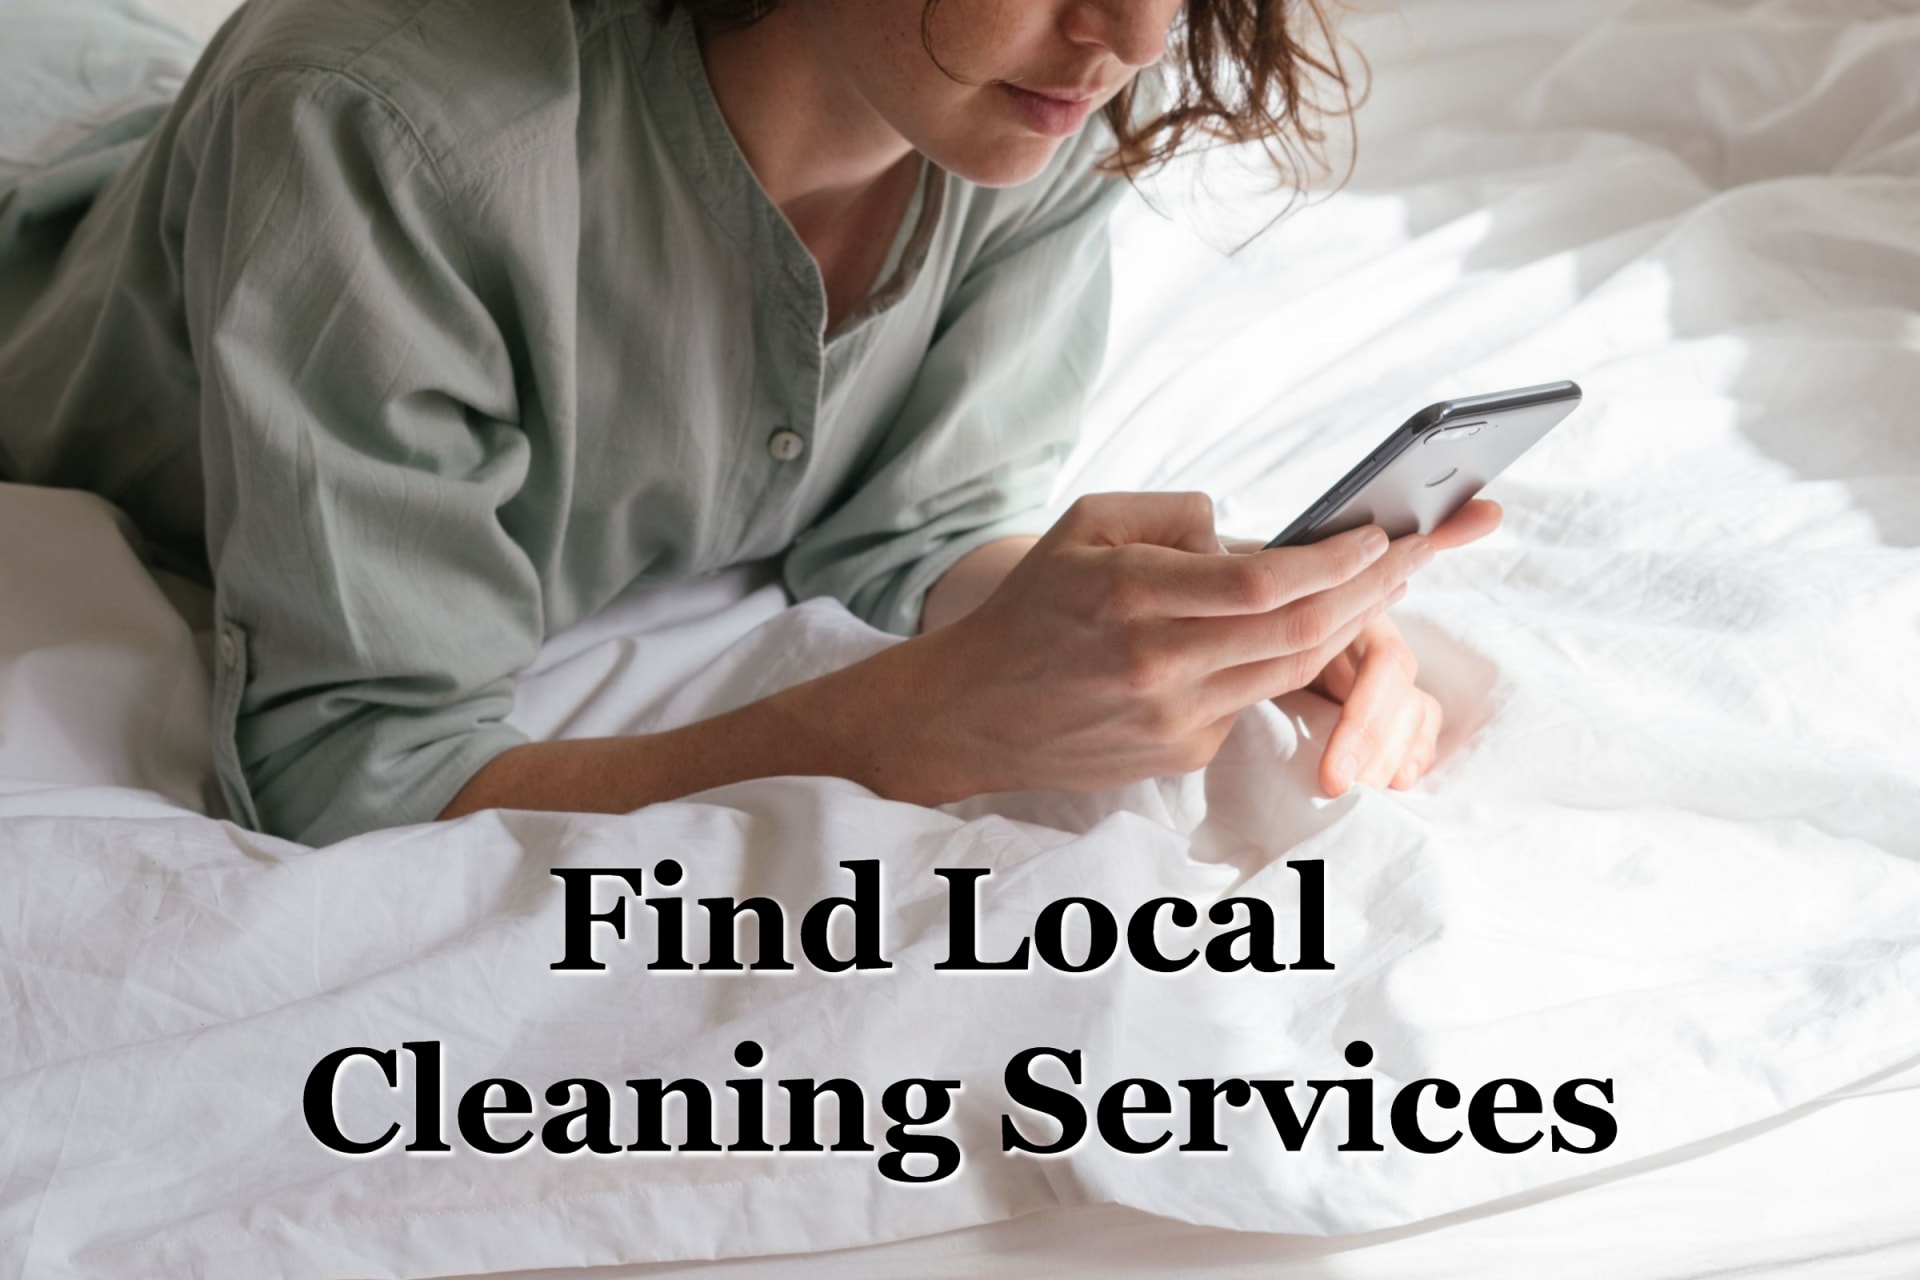 How Do I Find Cleaning Services Near Me?